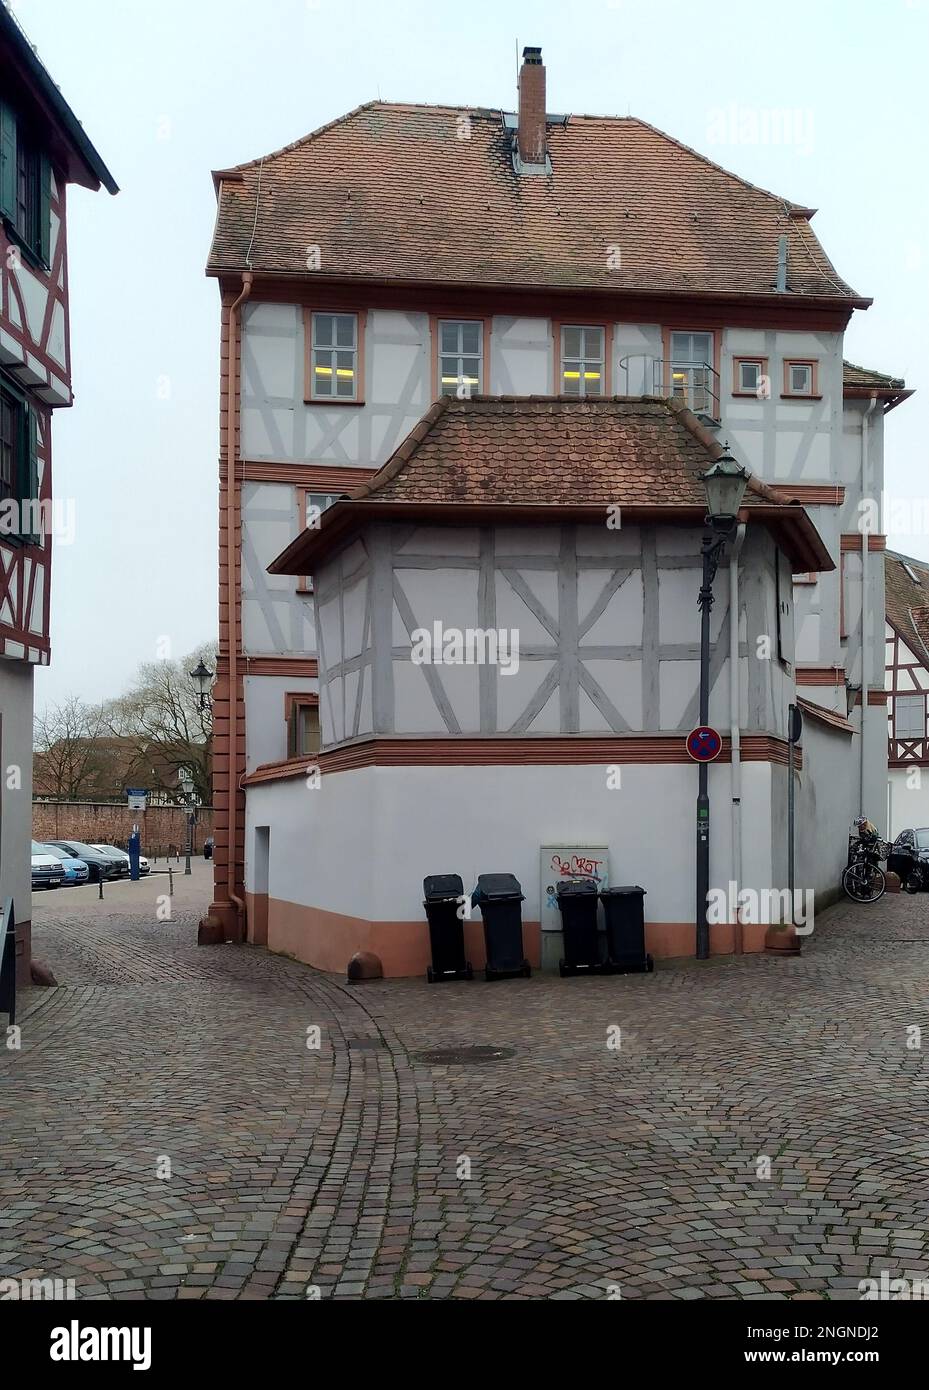 Traditional timber-framed house in the heart of the old town, Seligenstadt, Germany Stock Photo